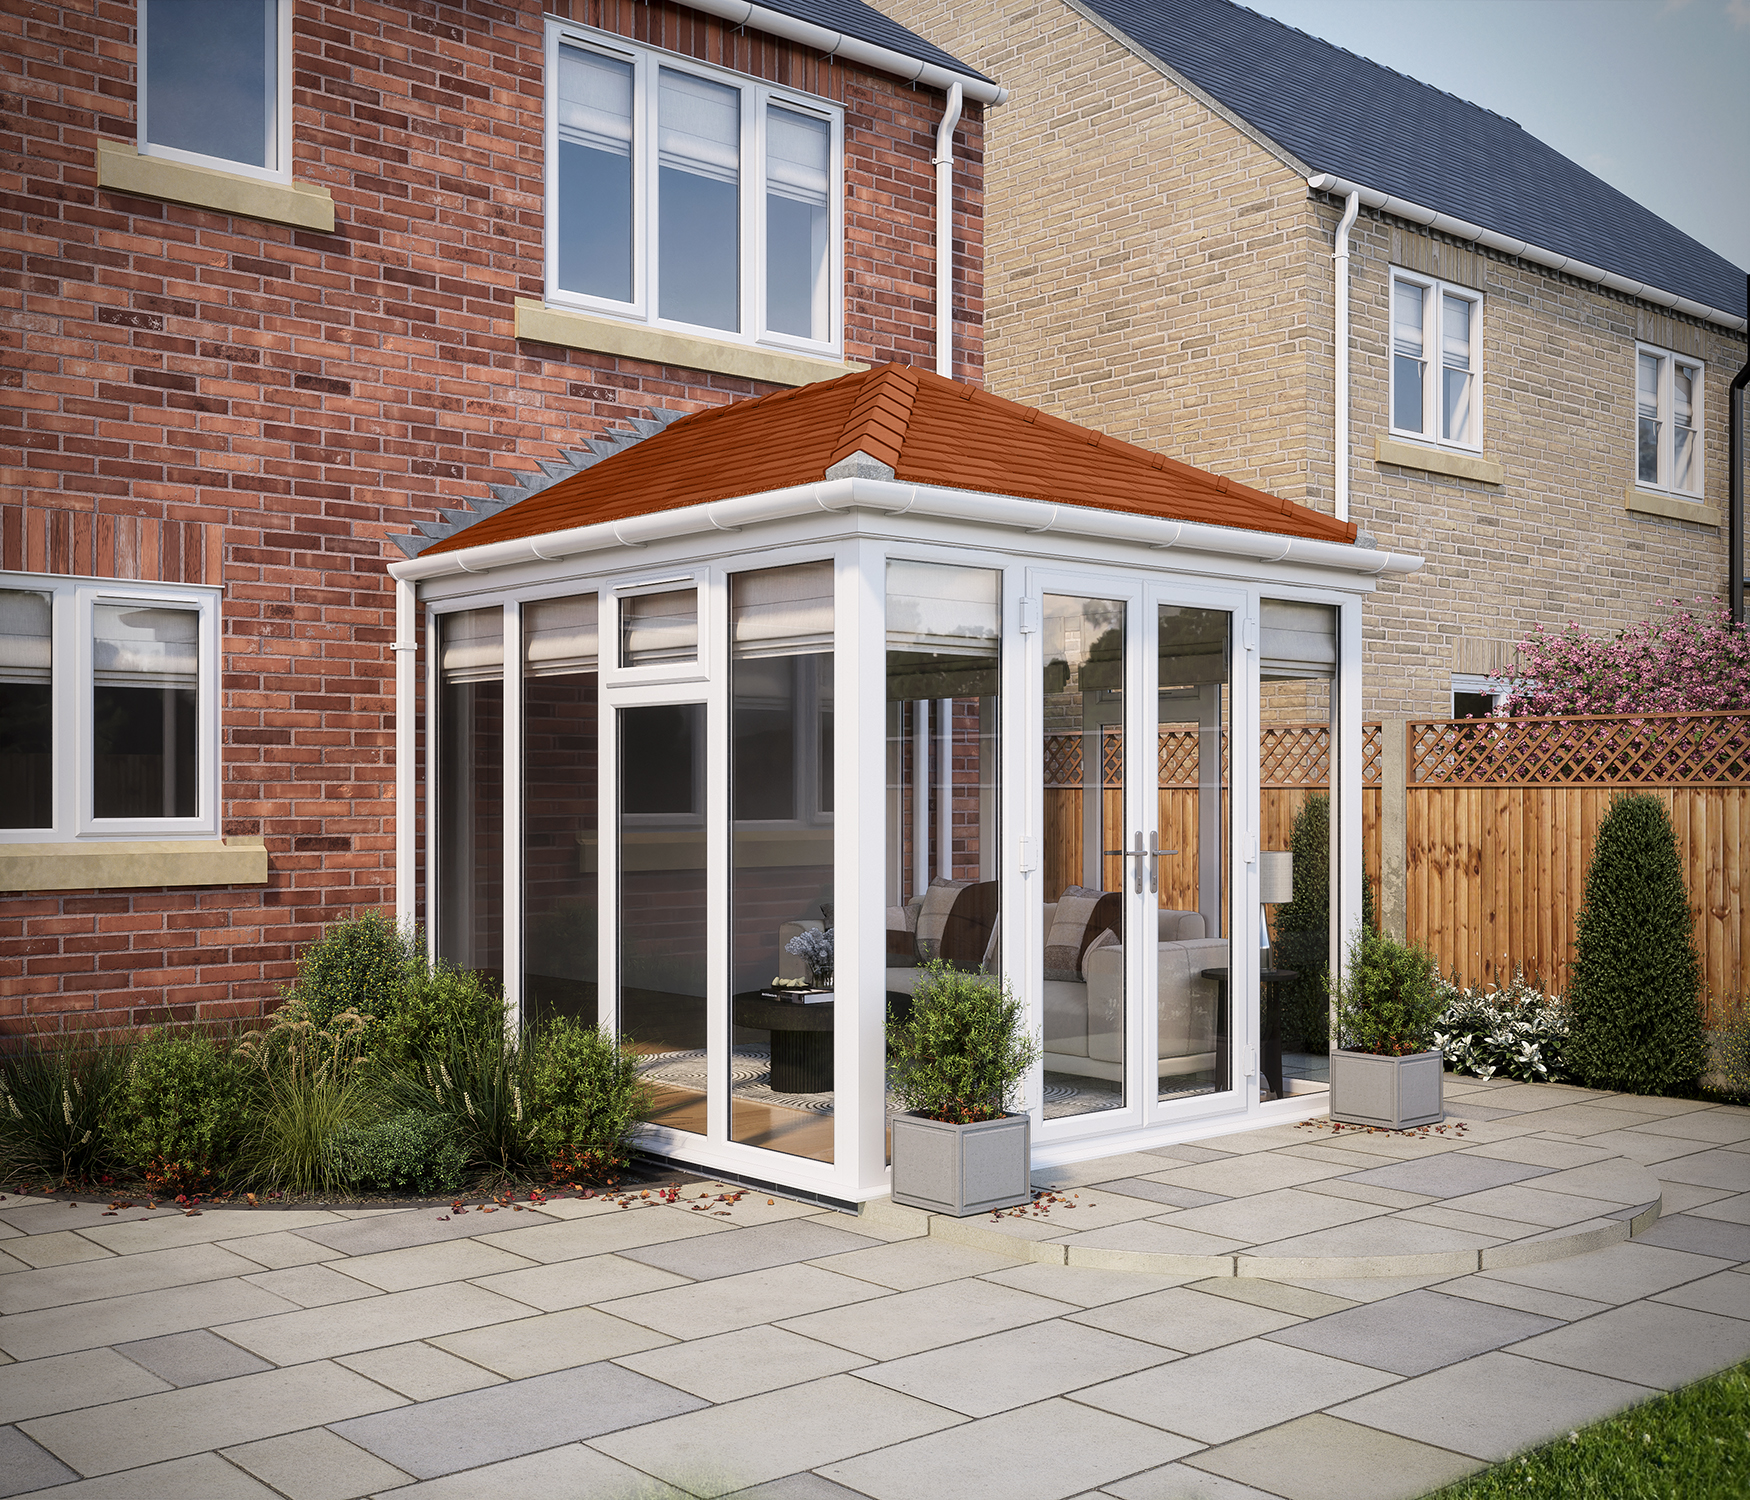 Image of SOLid Roof Full Height Edwardian Conservatory White Frames with Rustic Terracotta Tiles - 10 x 10ft